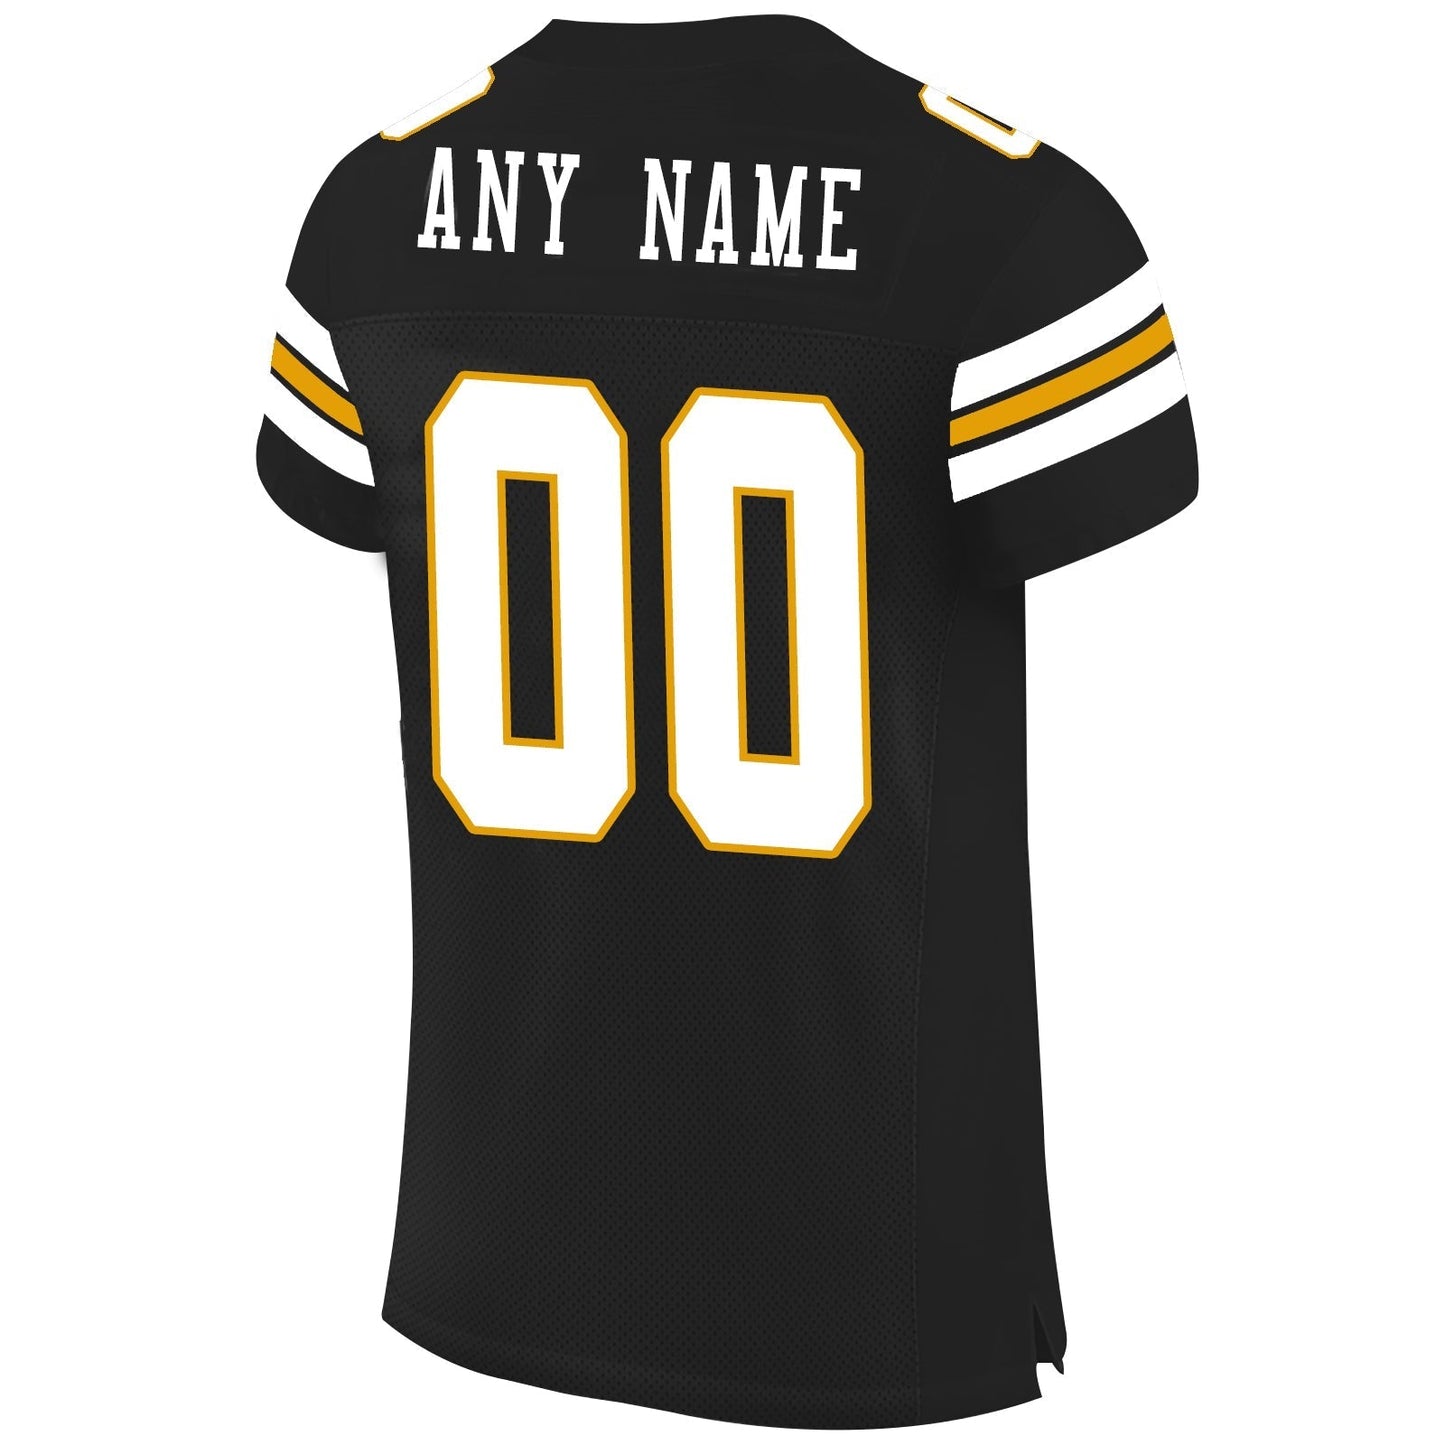 Custom P.Steelers Football Jerseys Design Green Stitched Name And Number Size S to 6XL Christmas Birthday Gift